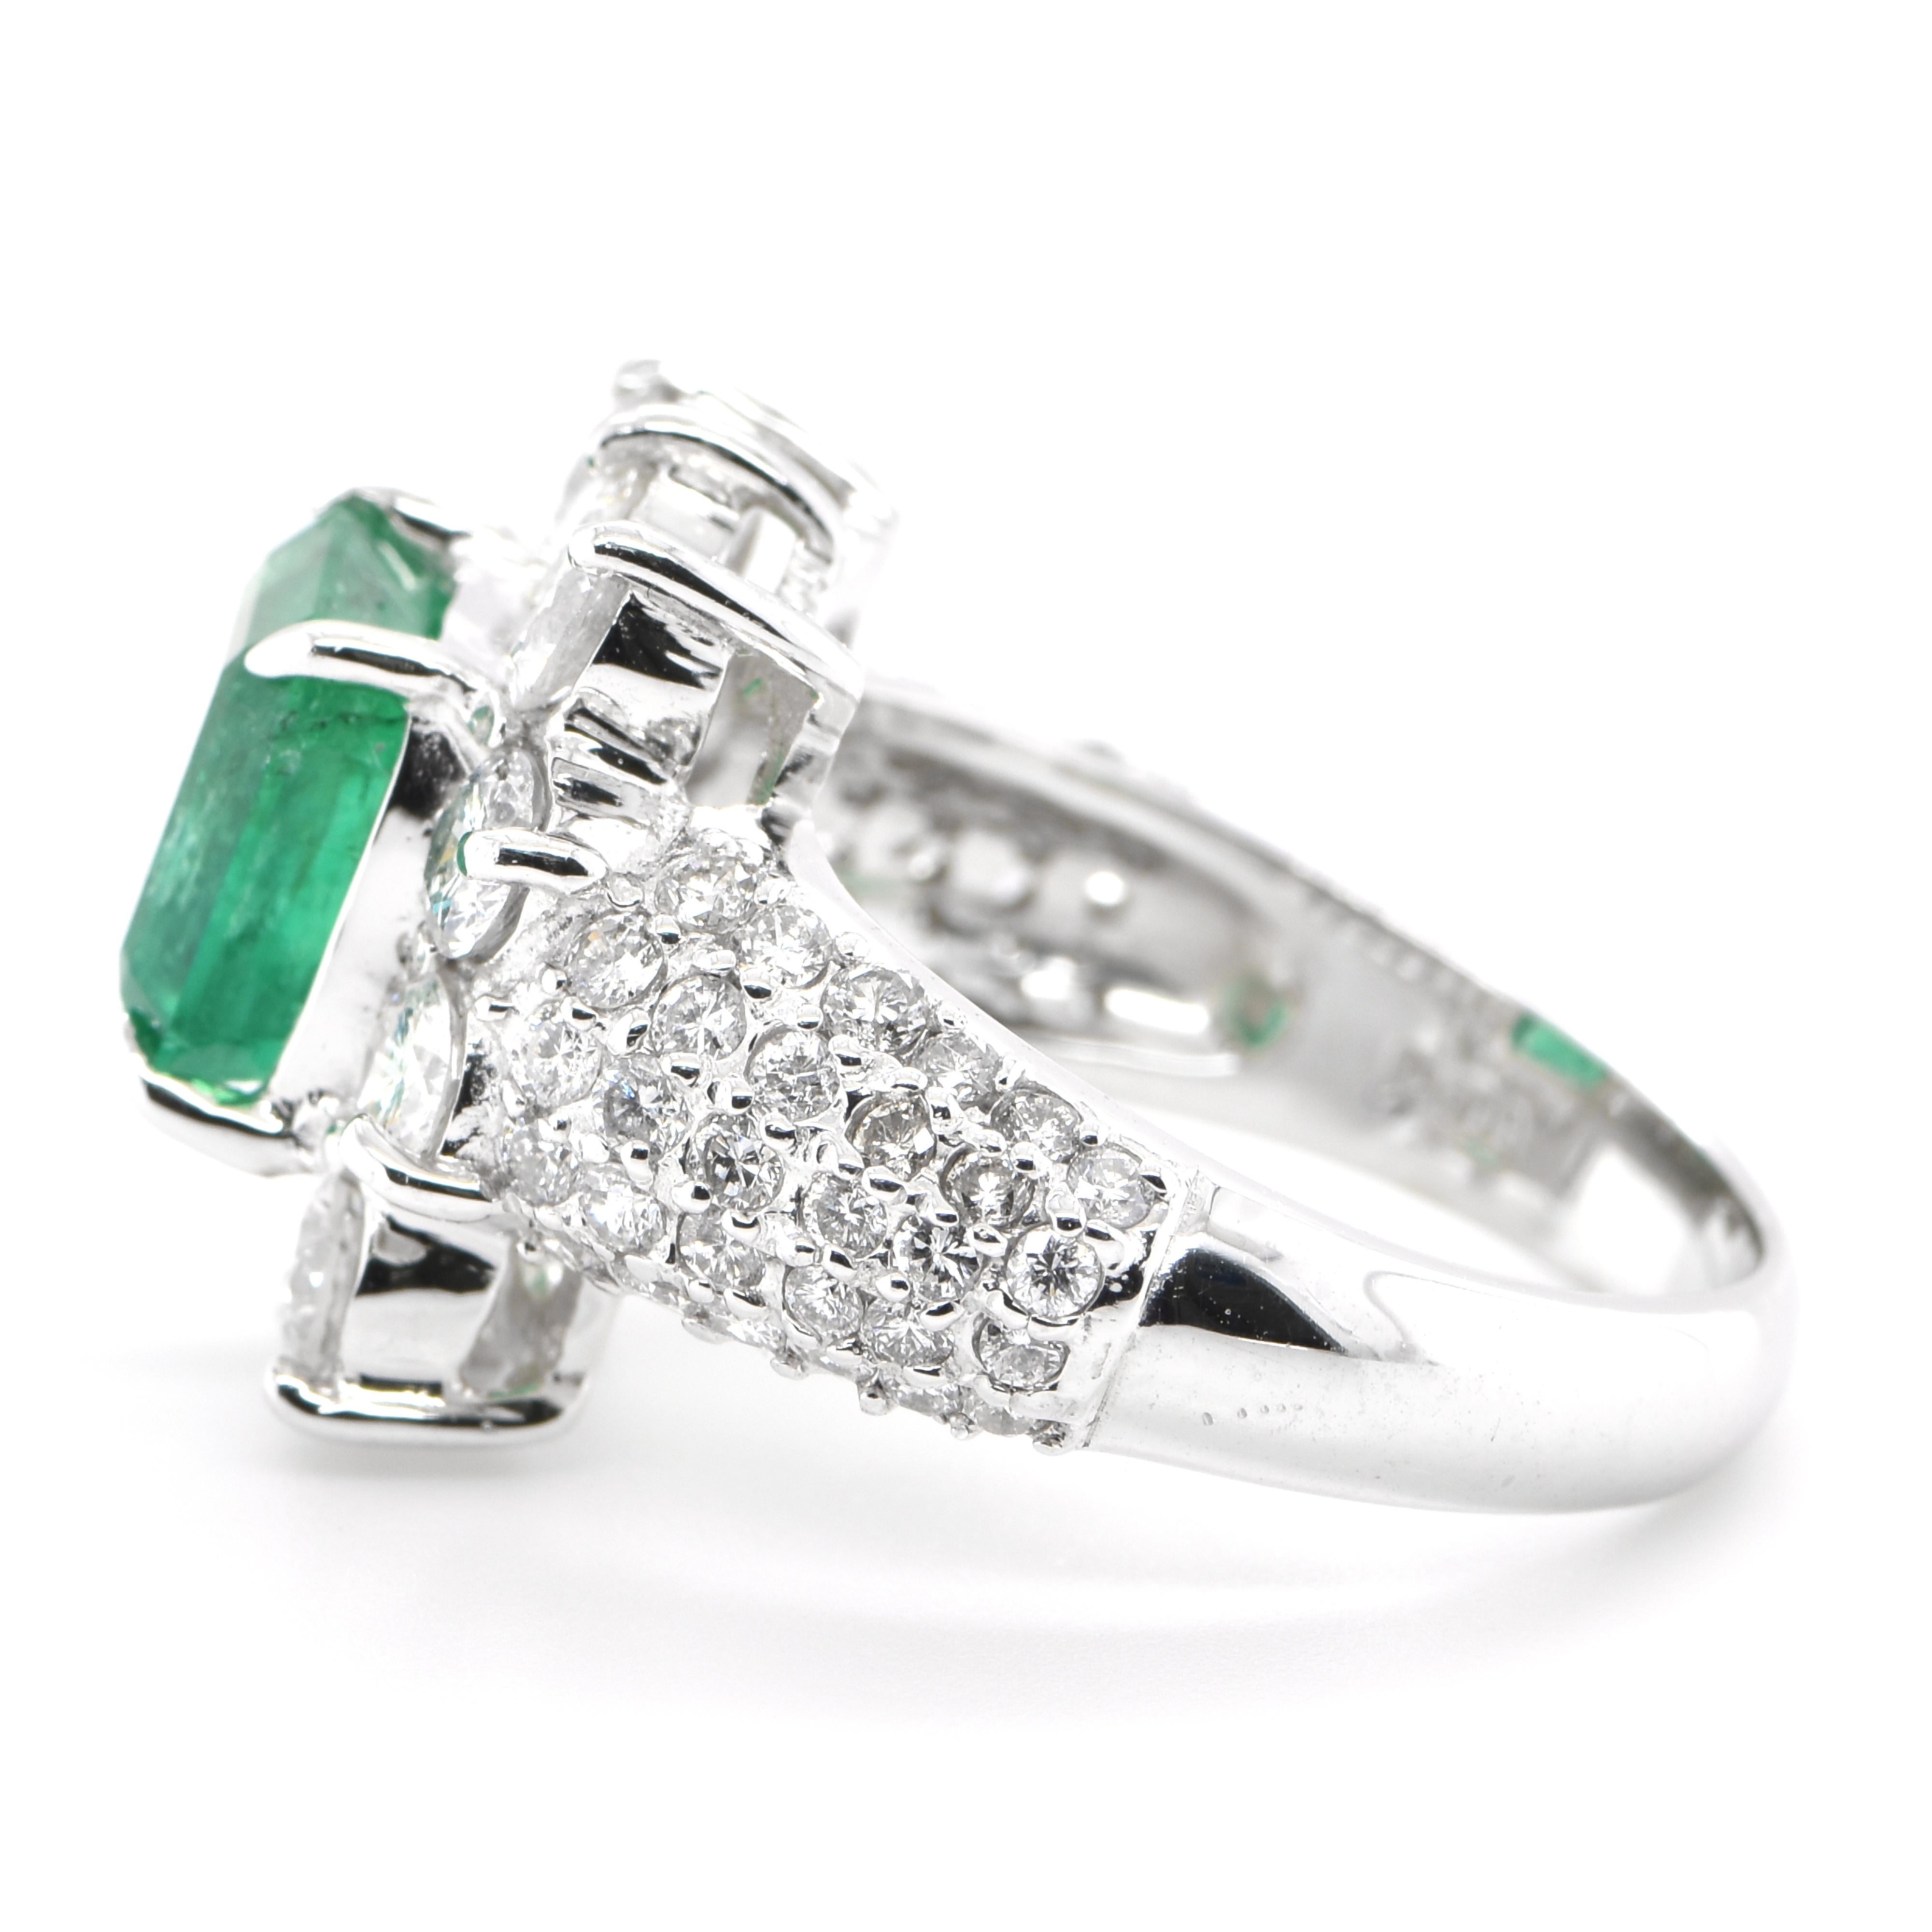 Emerald Cut 2.63 Carat Natural Emerald and Diamond Cocktail Ring Set in Platinum For Sale